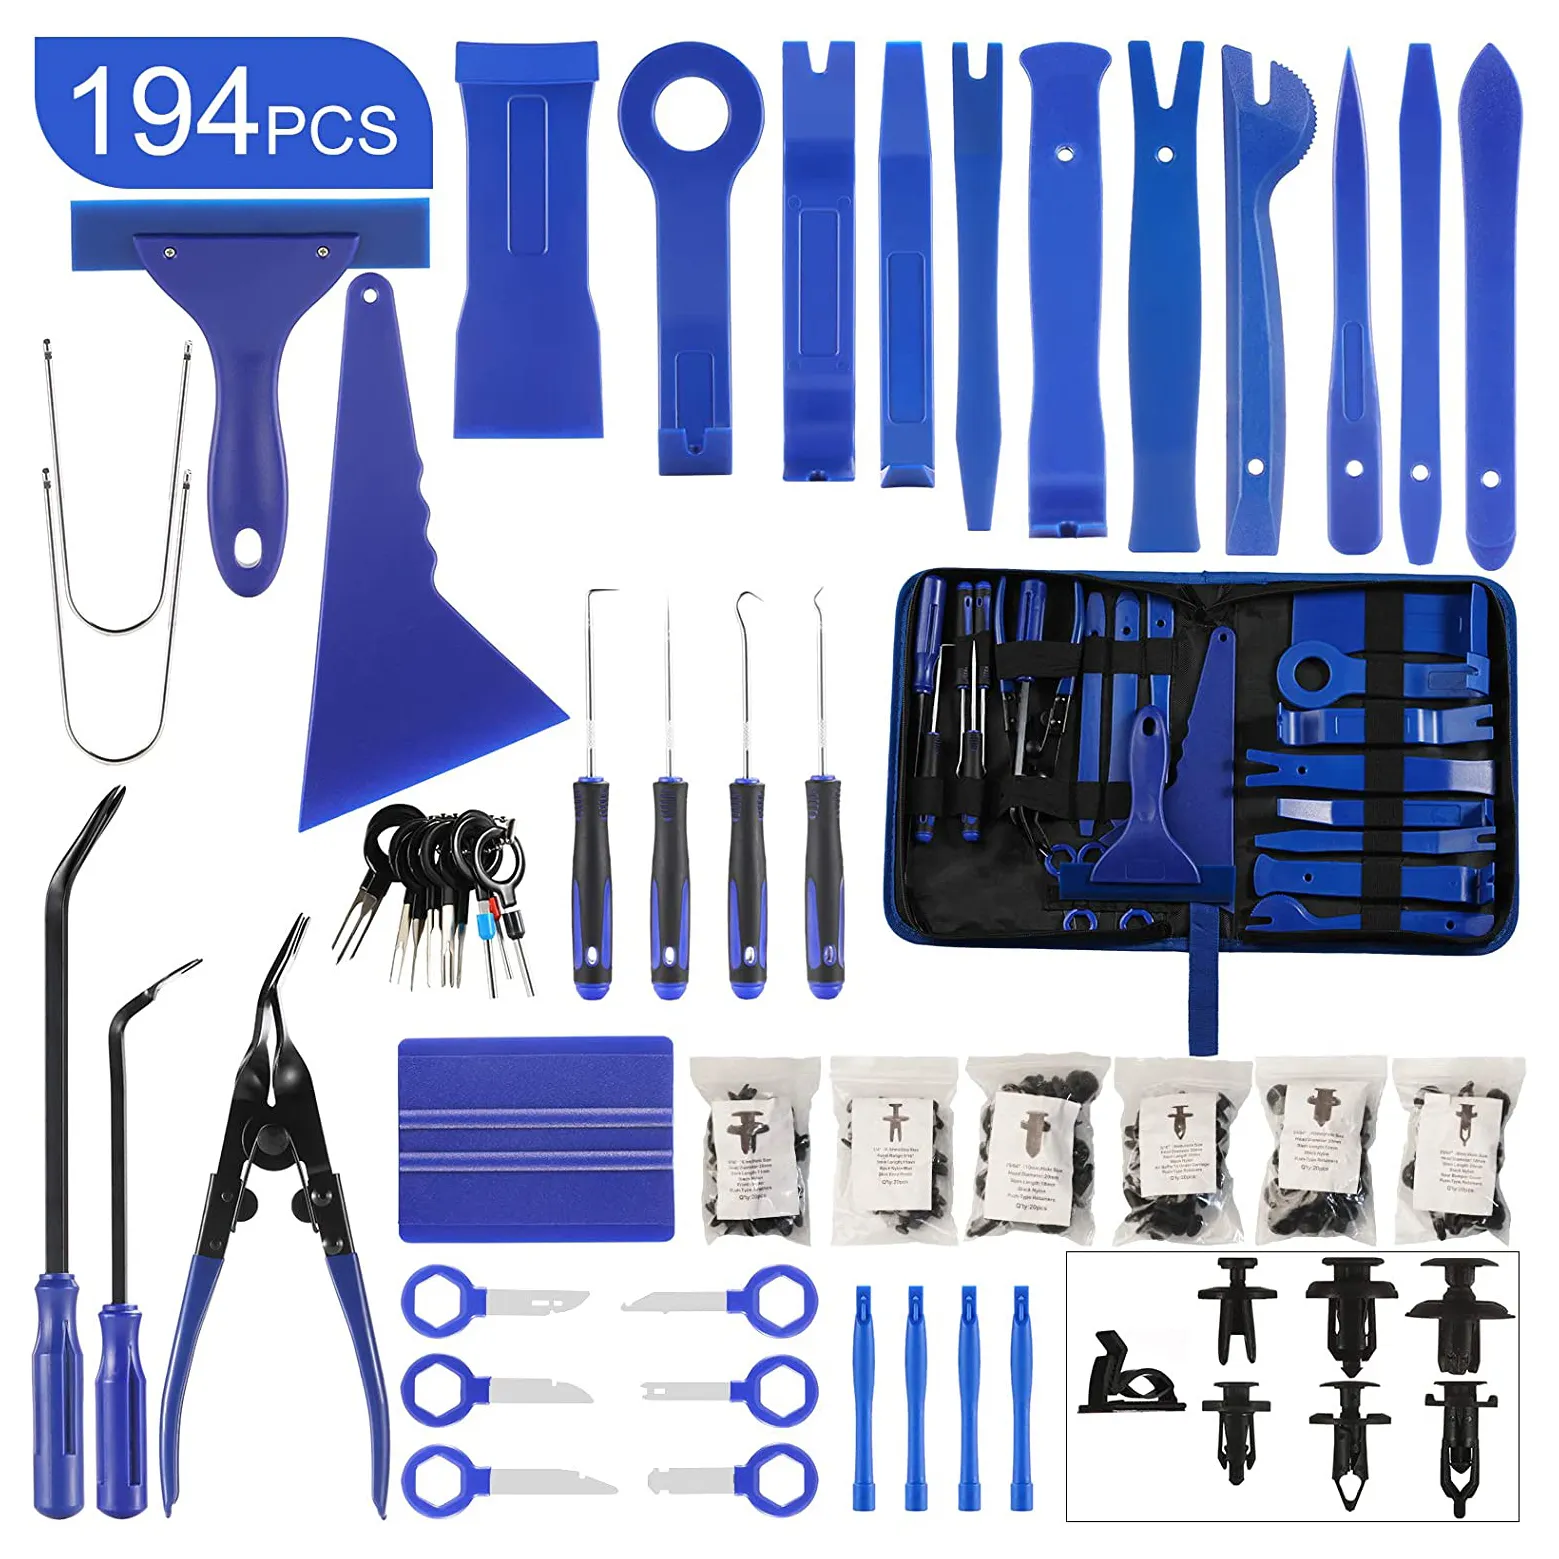 194Pcs Auto Trim Removal Kit Car Upholstery Removal Clip Pliers Fastener Remover Pry Tool Set for Door Panel Audio Dash Window